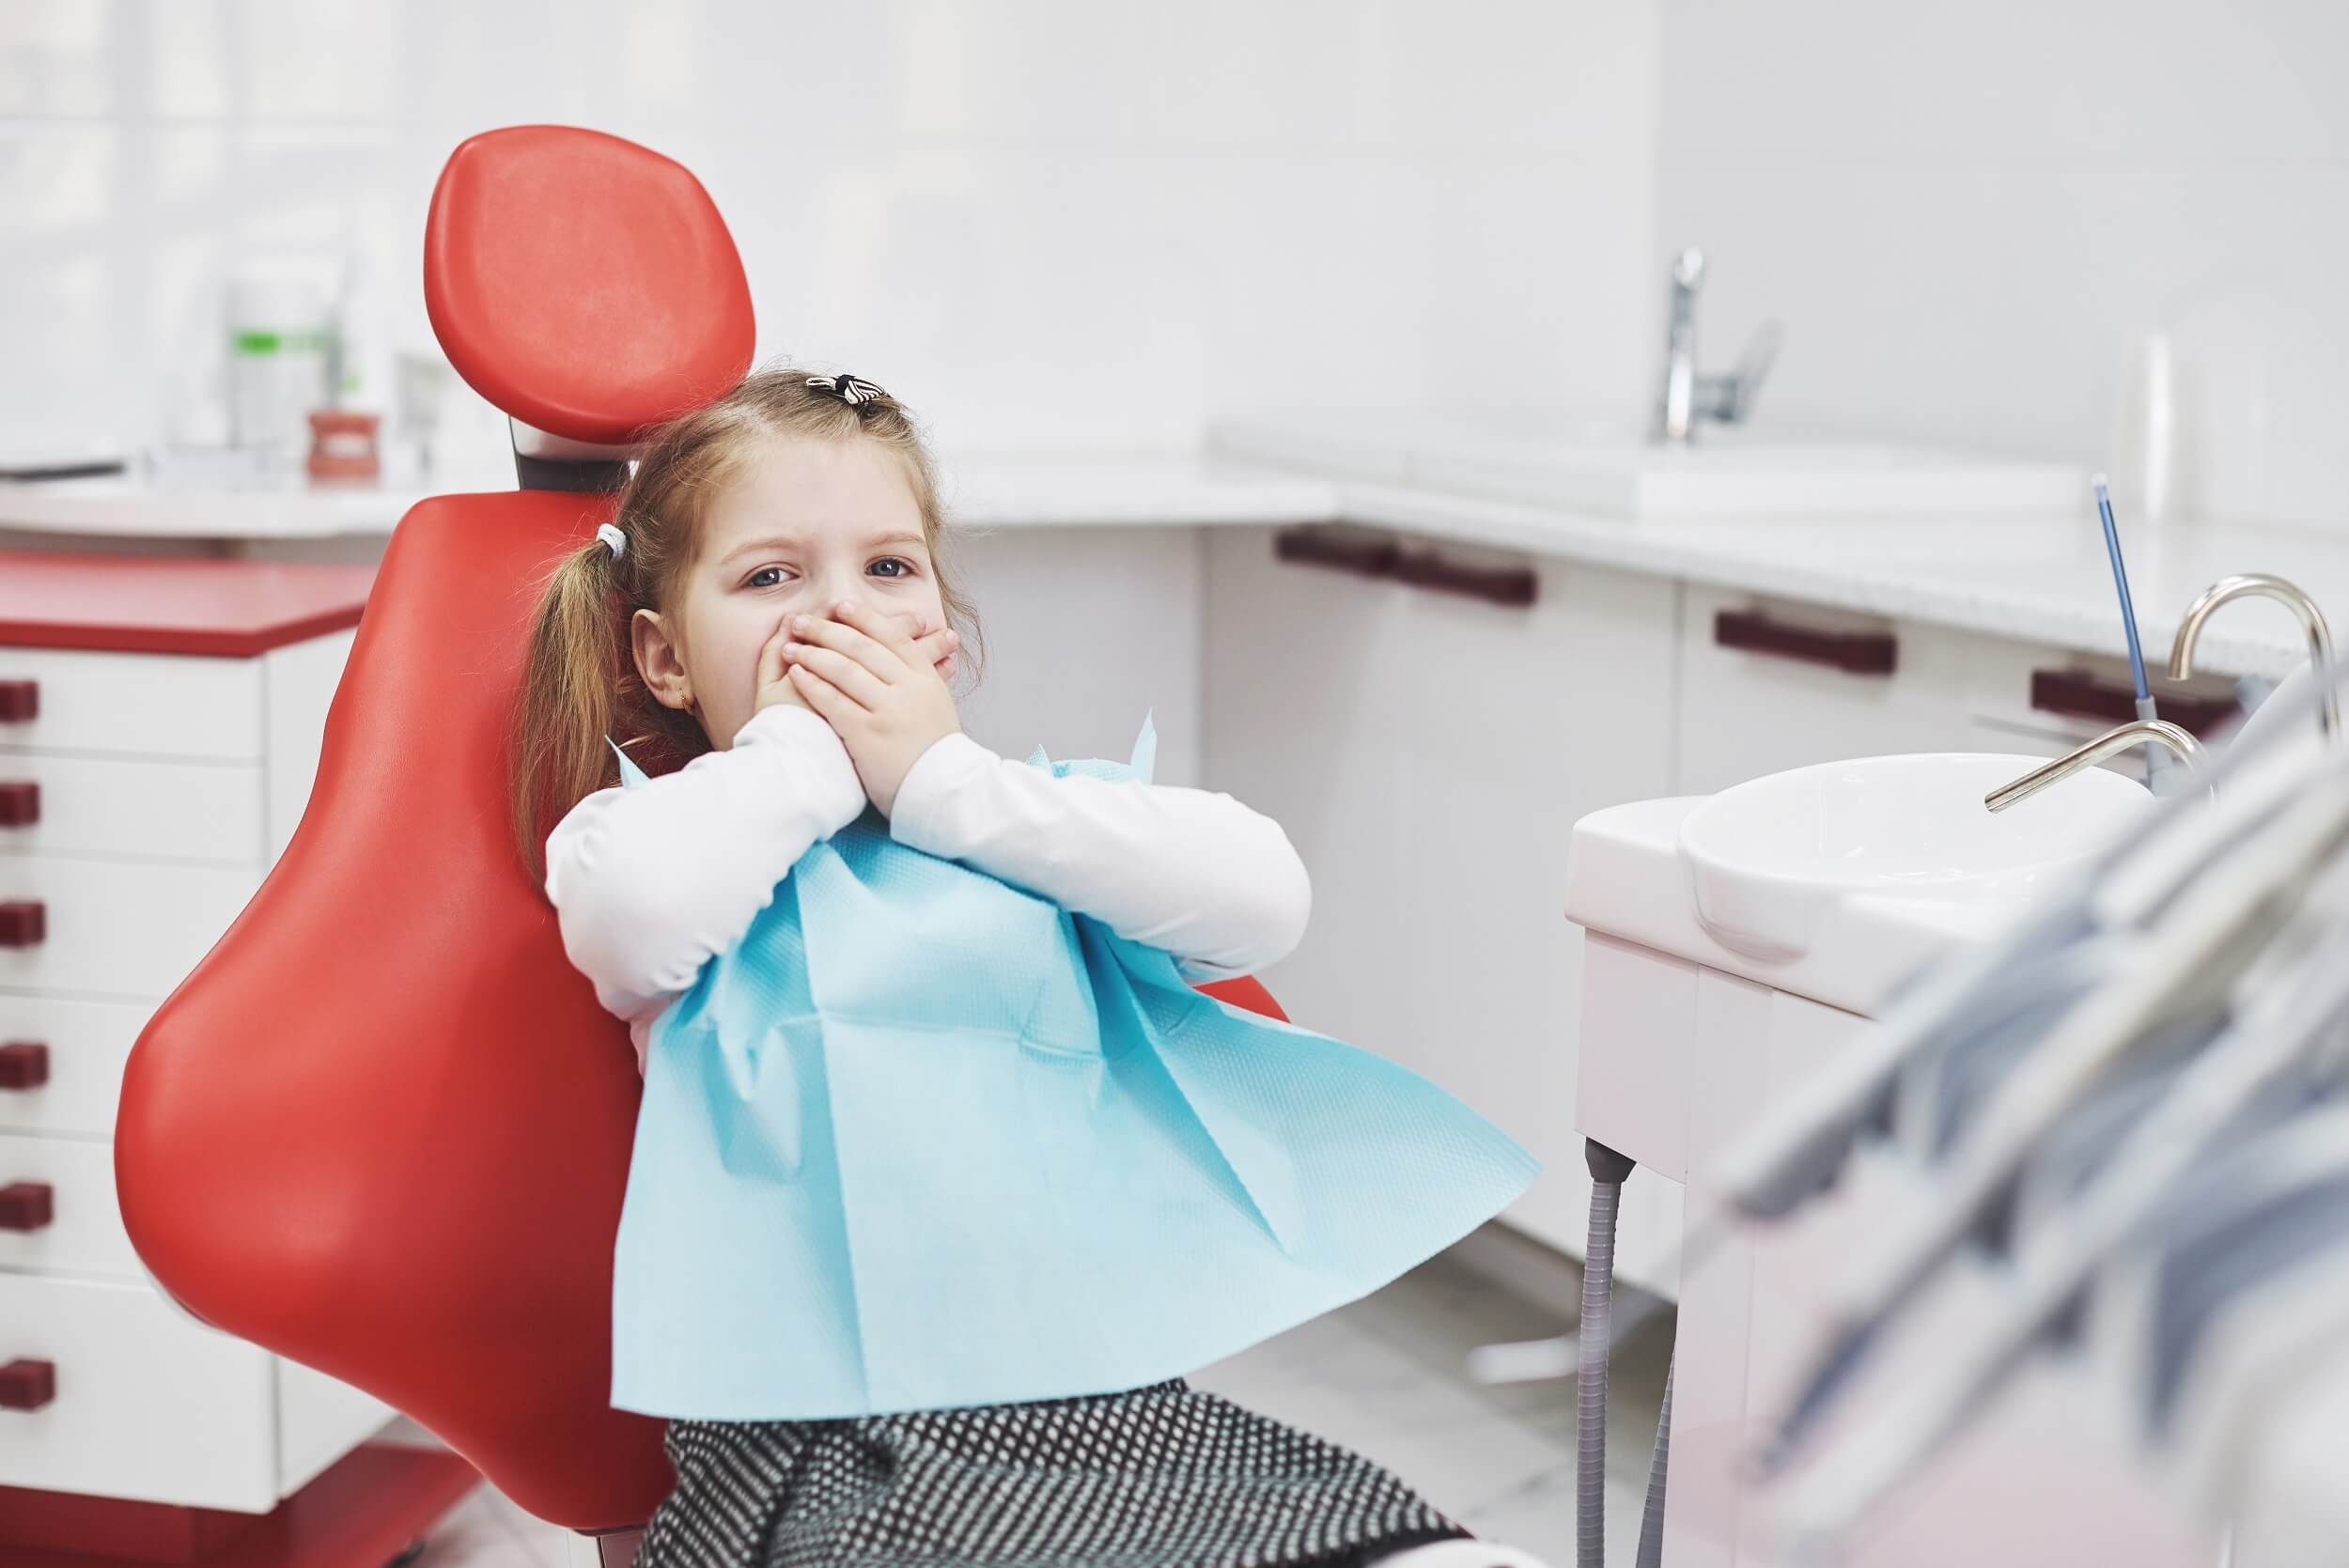 A little girl sitting in a dentist's chair covering her mouth with both hands.